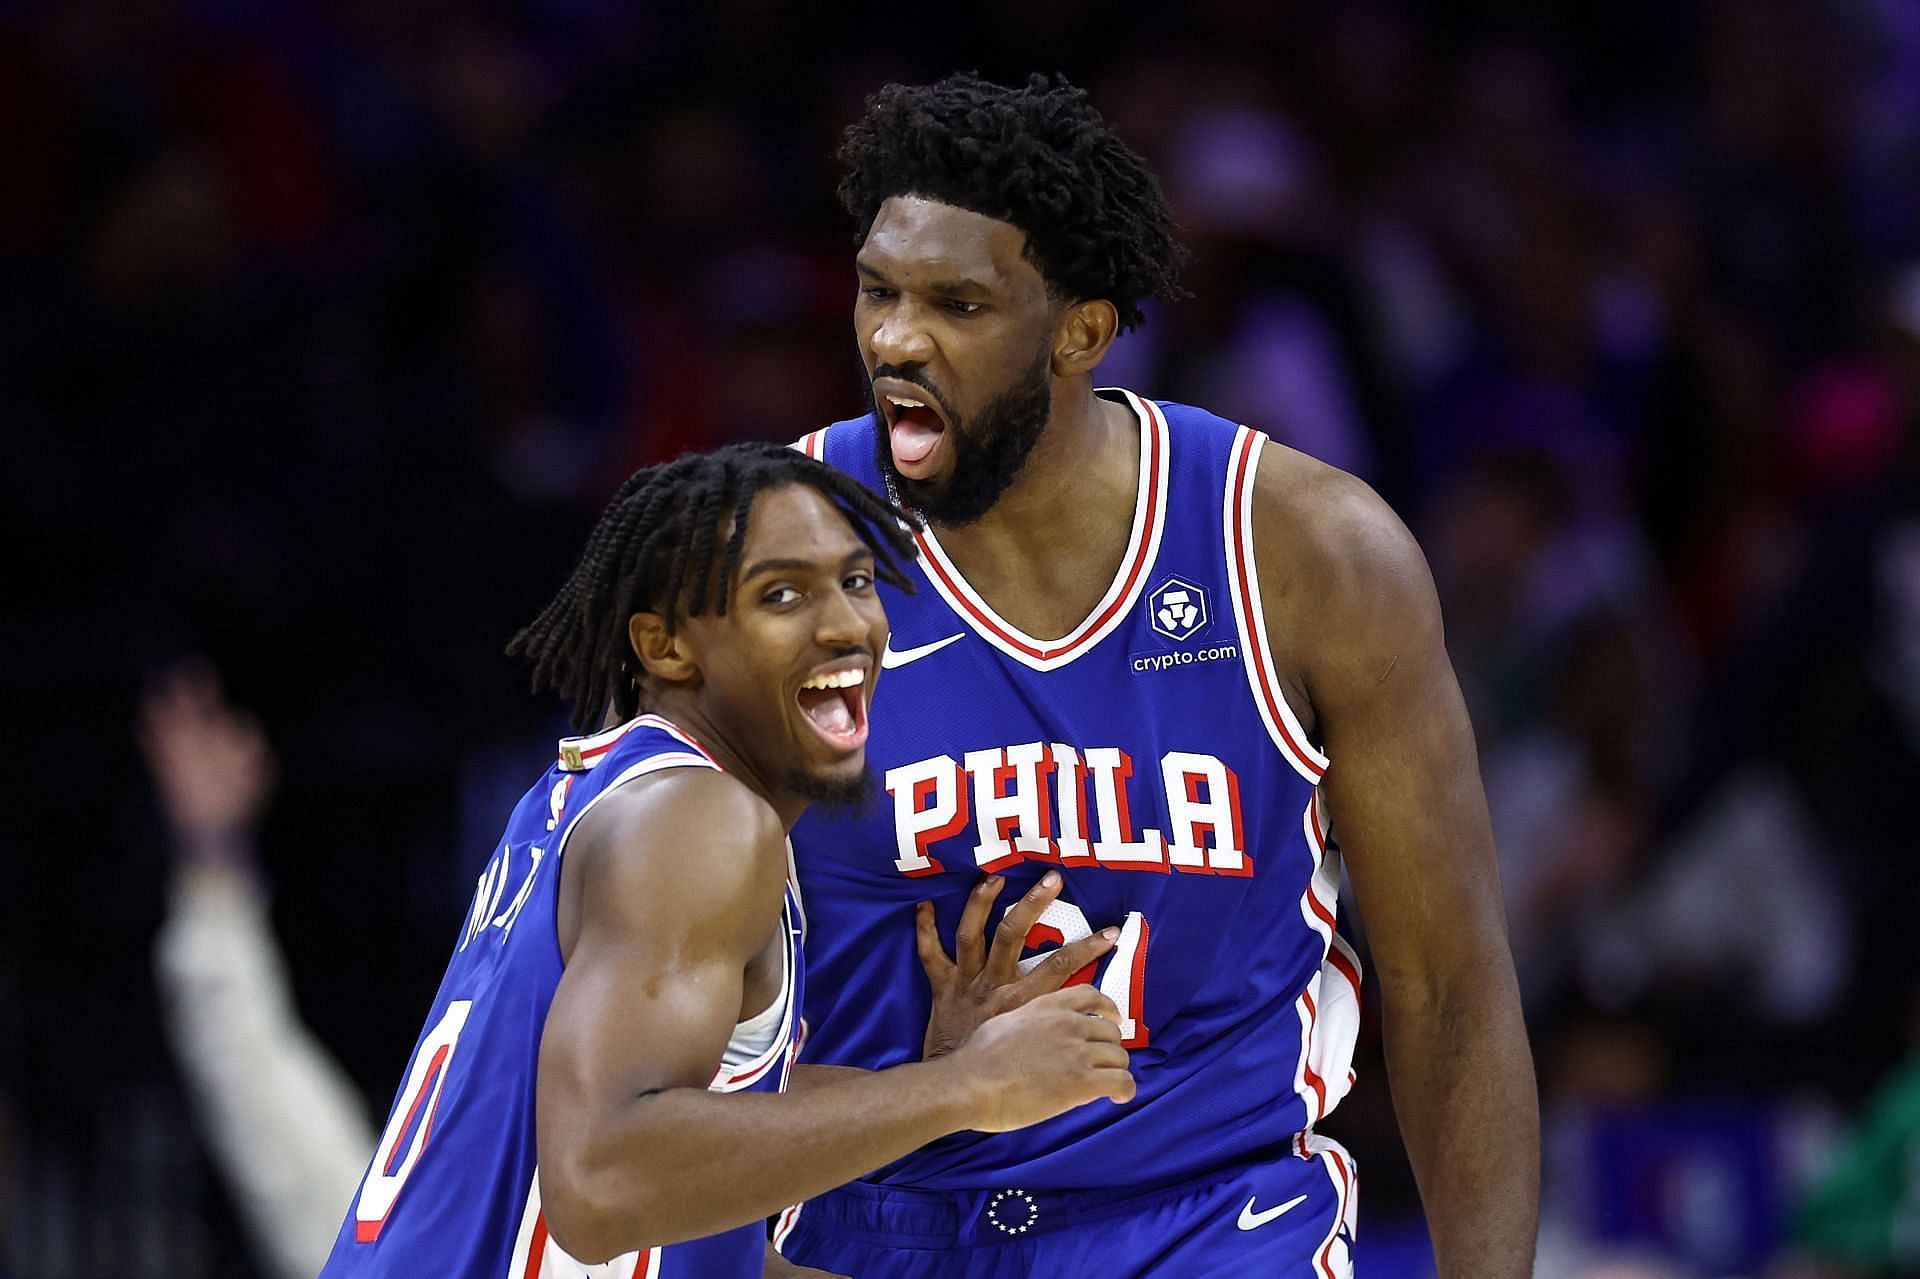 Looking at the Philadelphia 76ers starting lineup and depth chart